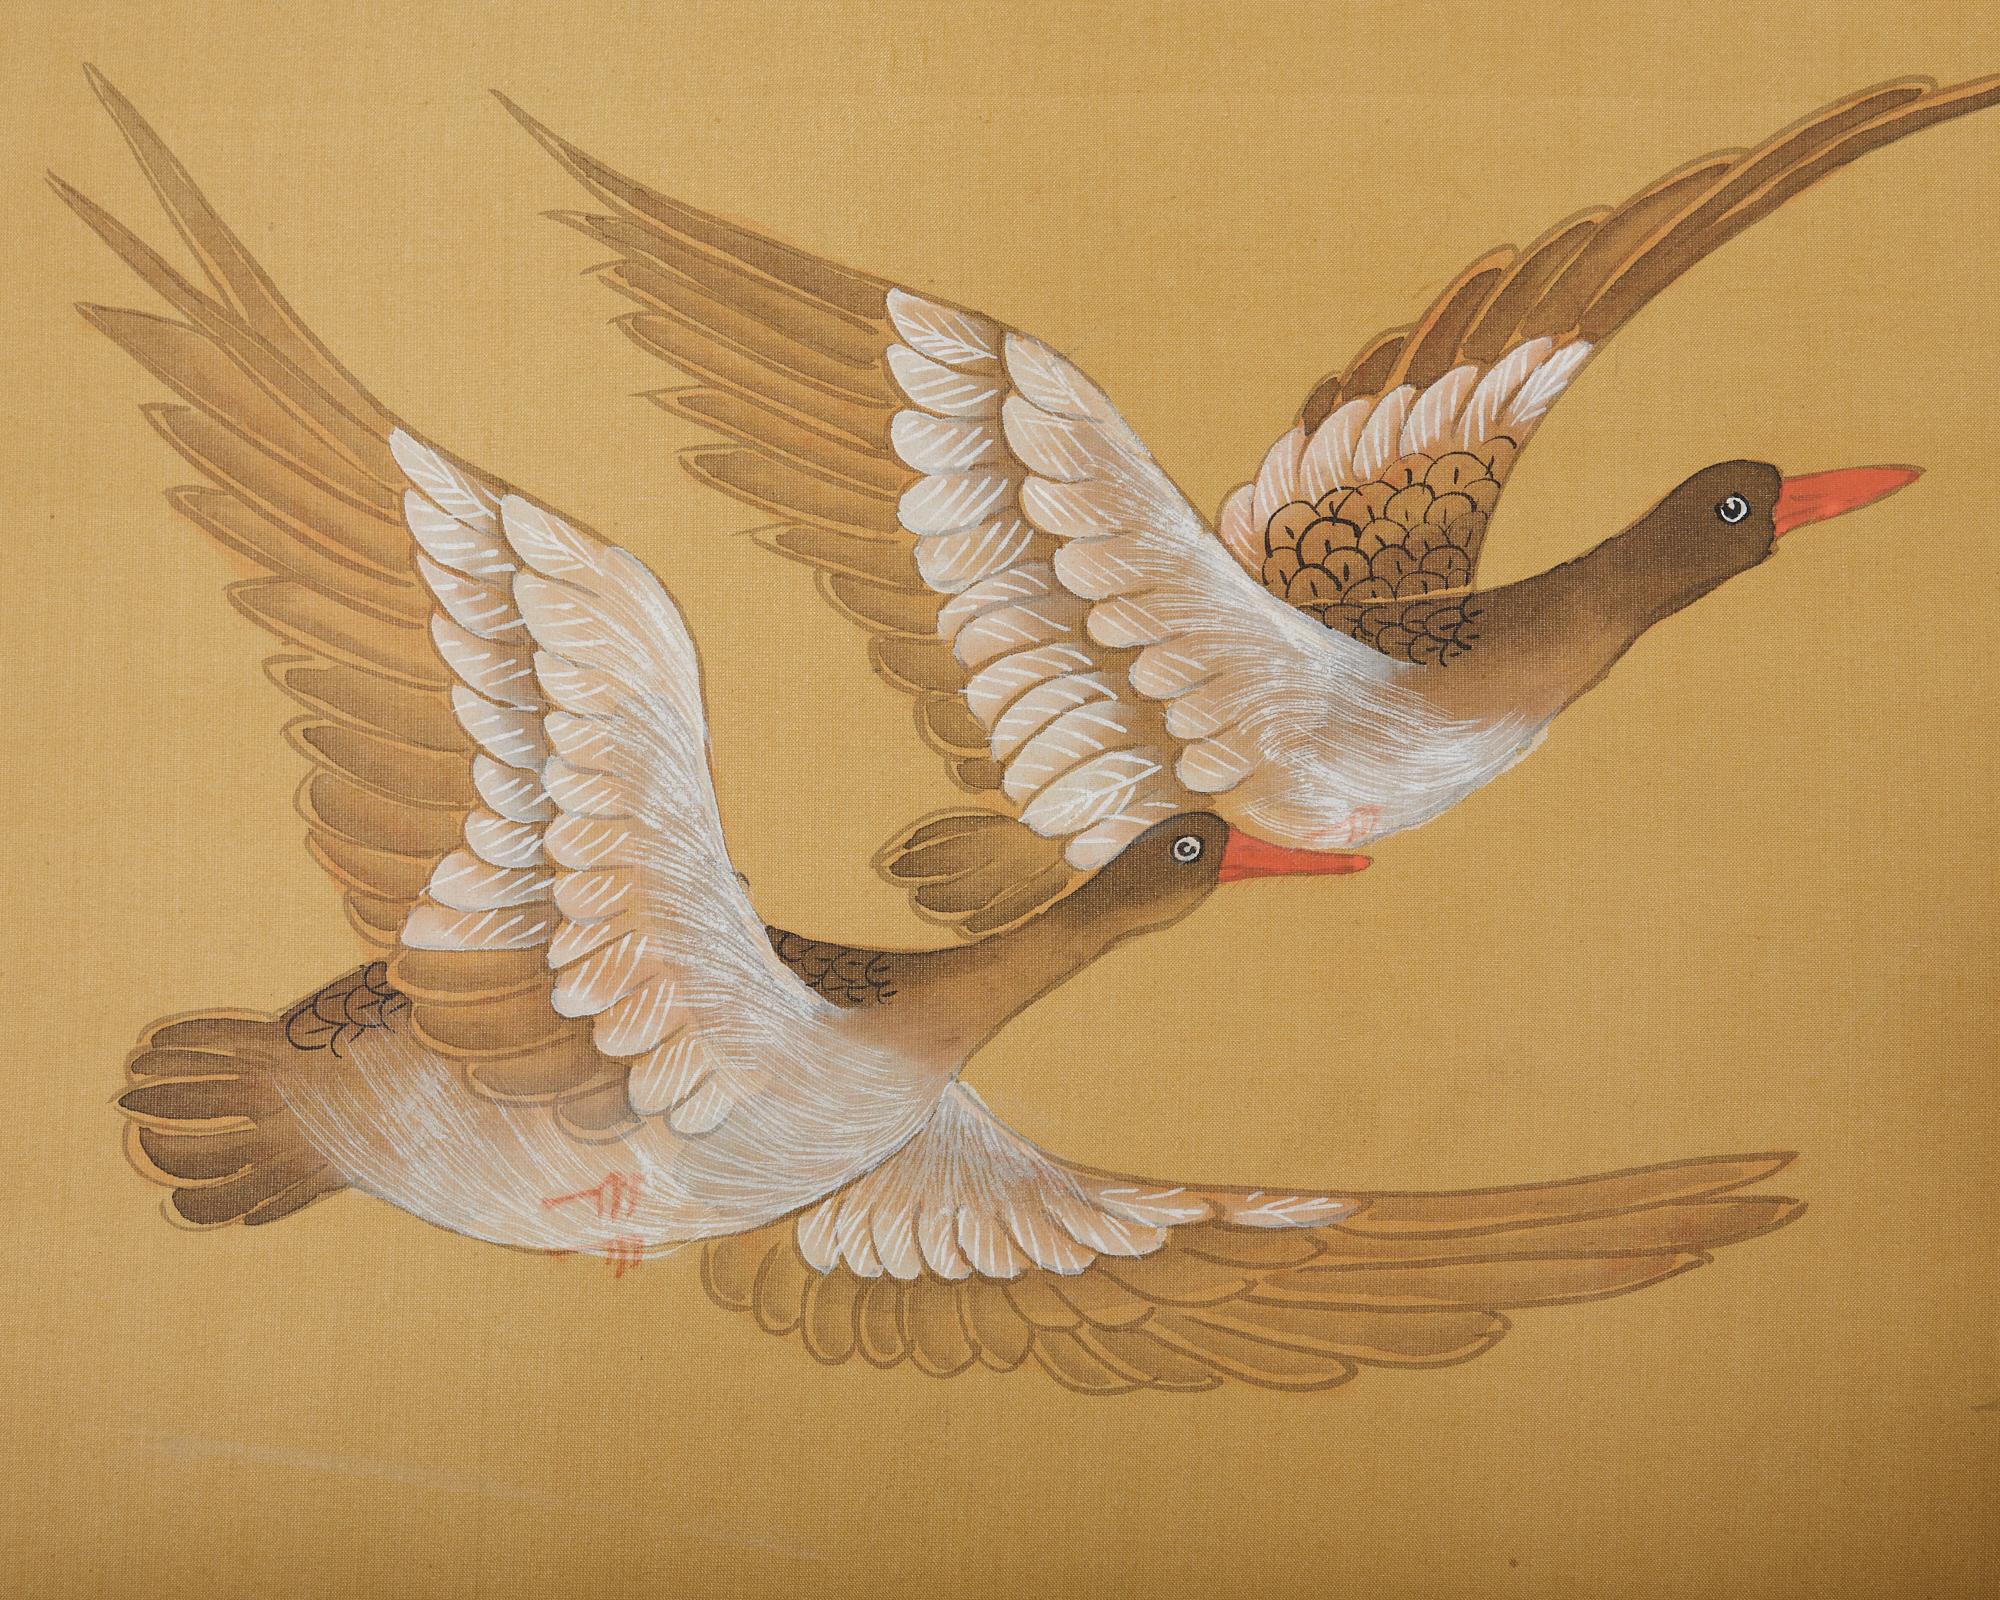 Japanese Style Four Panel Screen Geese Flight Over Reeds In Good Condition For Sale In Rio Vista, CA